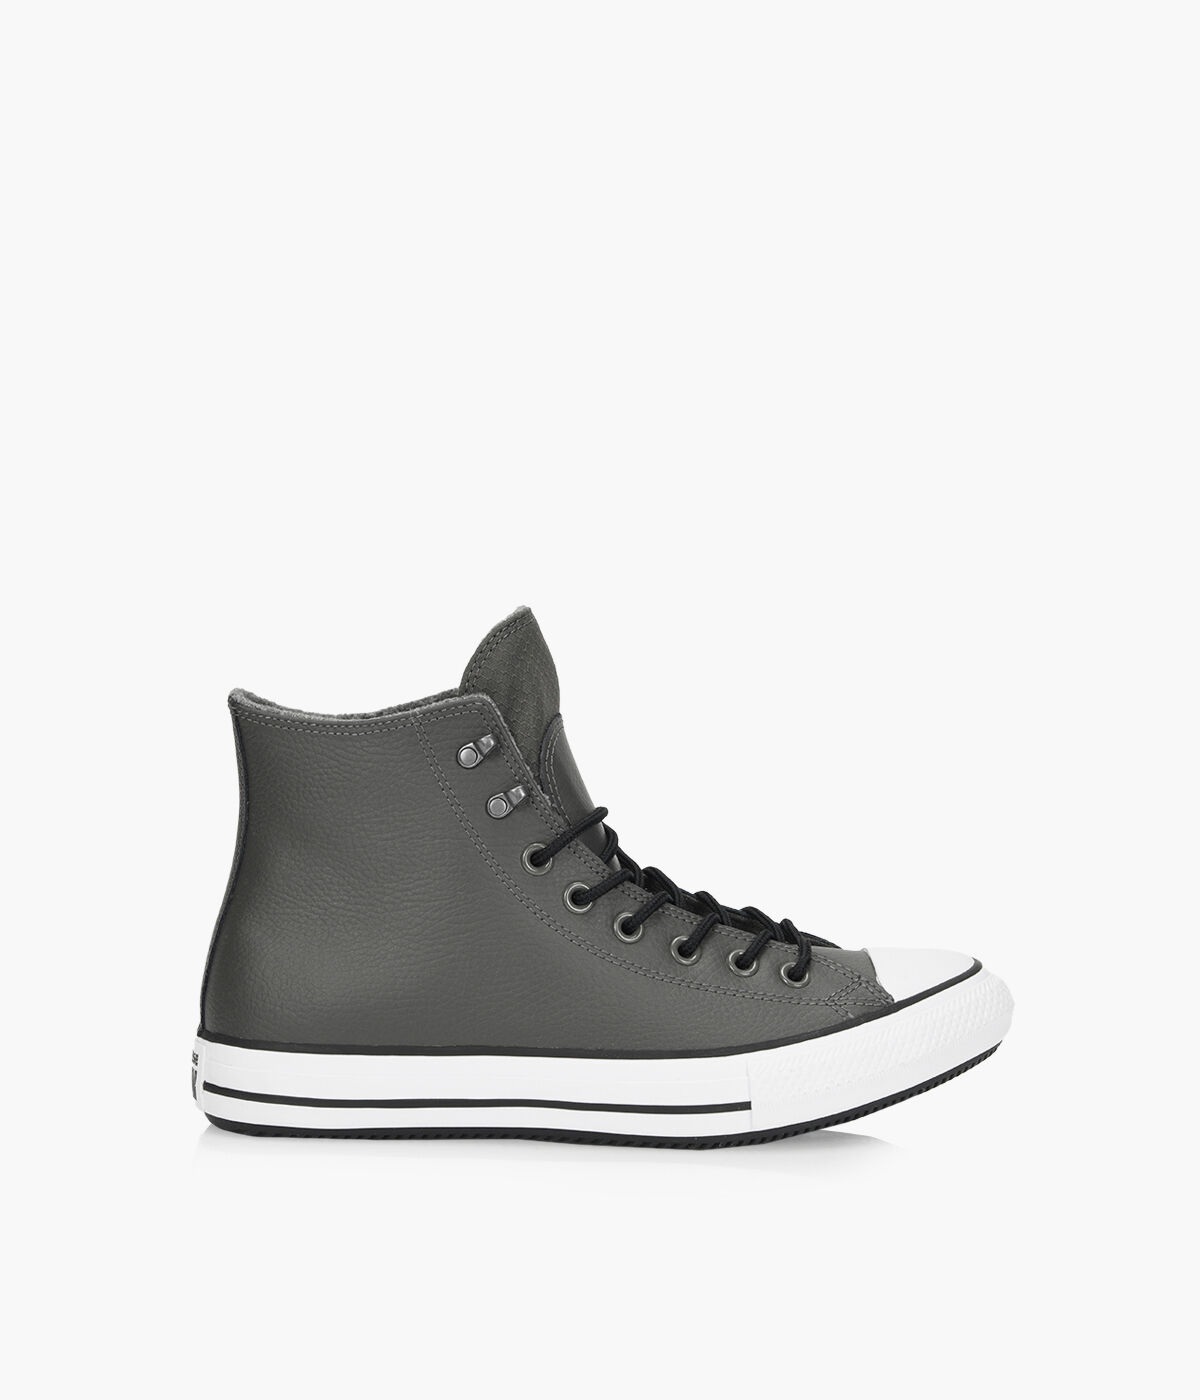 CONVERSE CTAS WINTER - Leather | Browns 